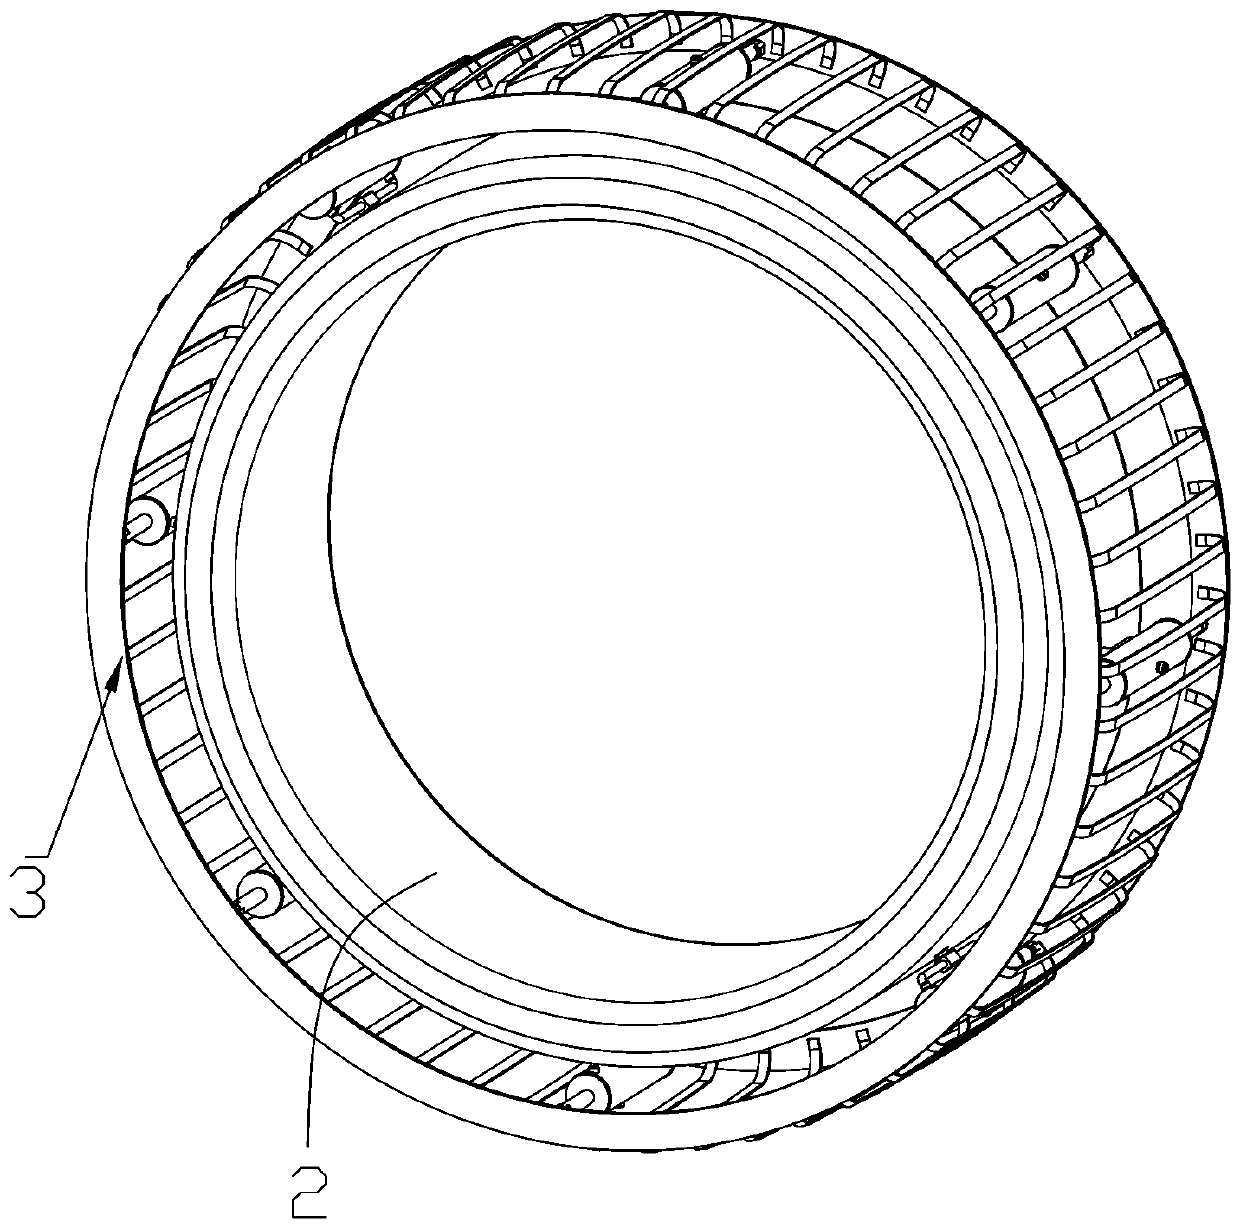 Non-pneumatic tire with variable contact area